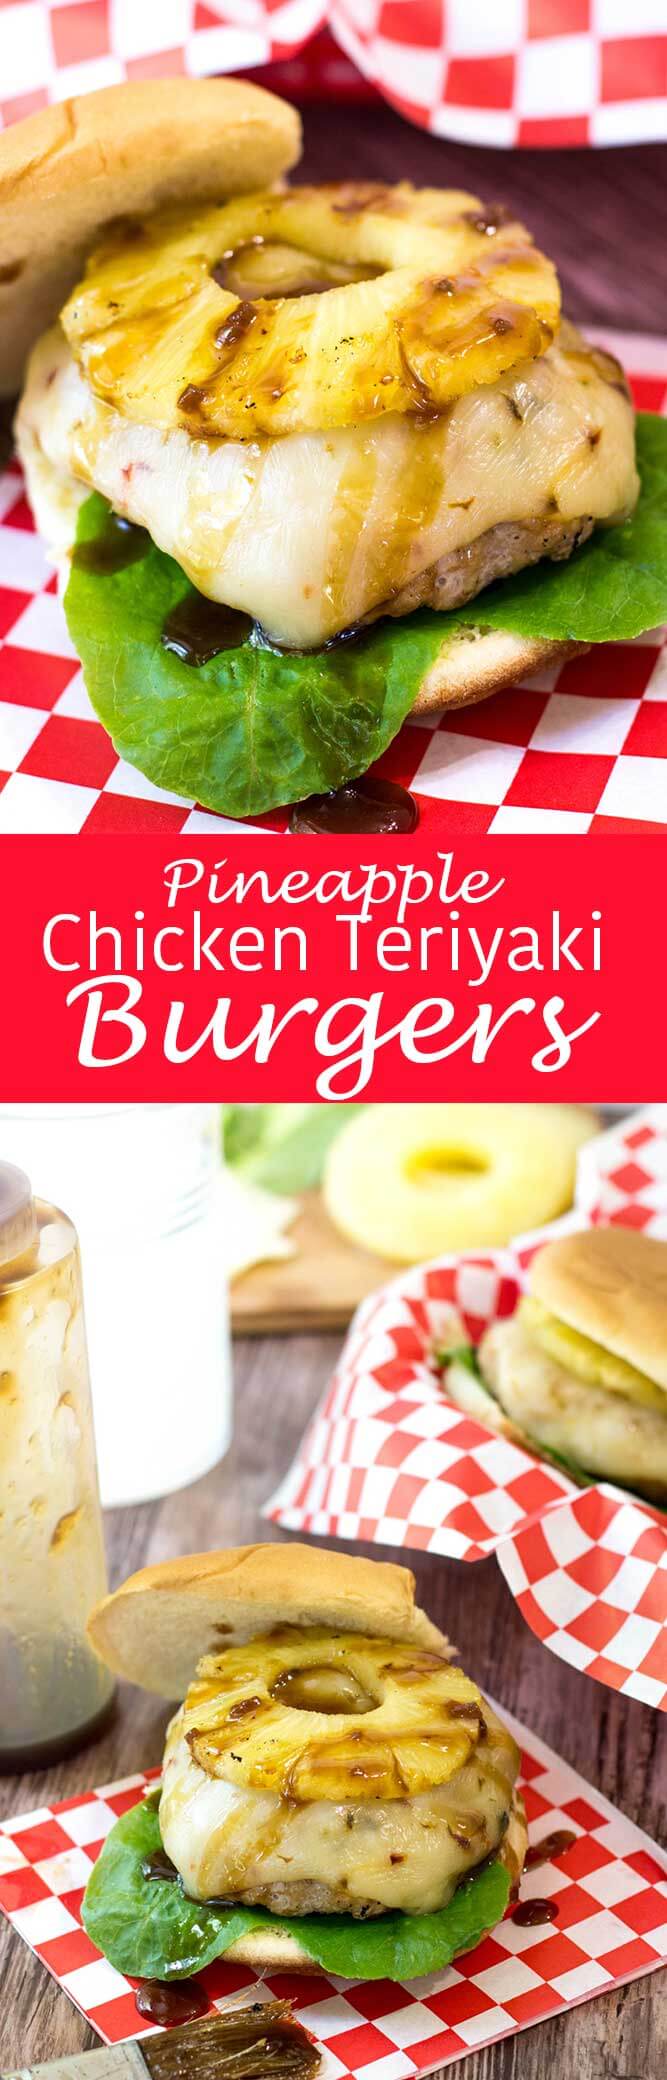 Pineapply Chicken Teriyaki Burgers are juicy, delicious, and perfectly flavored. 